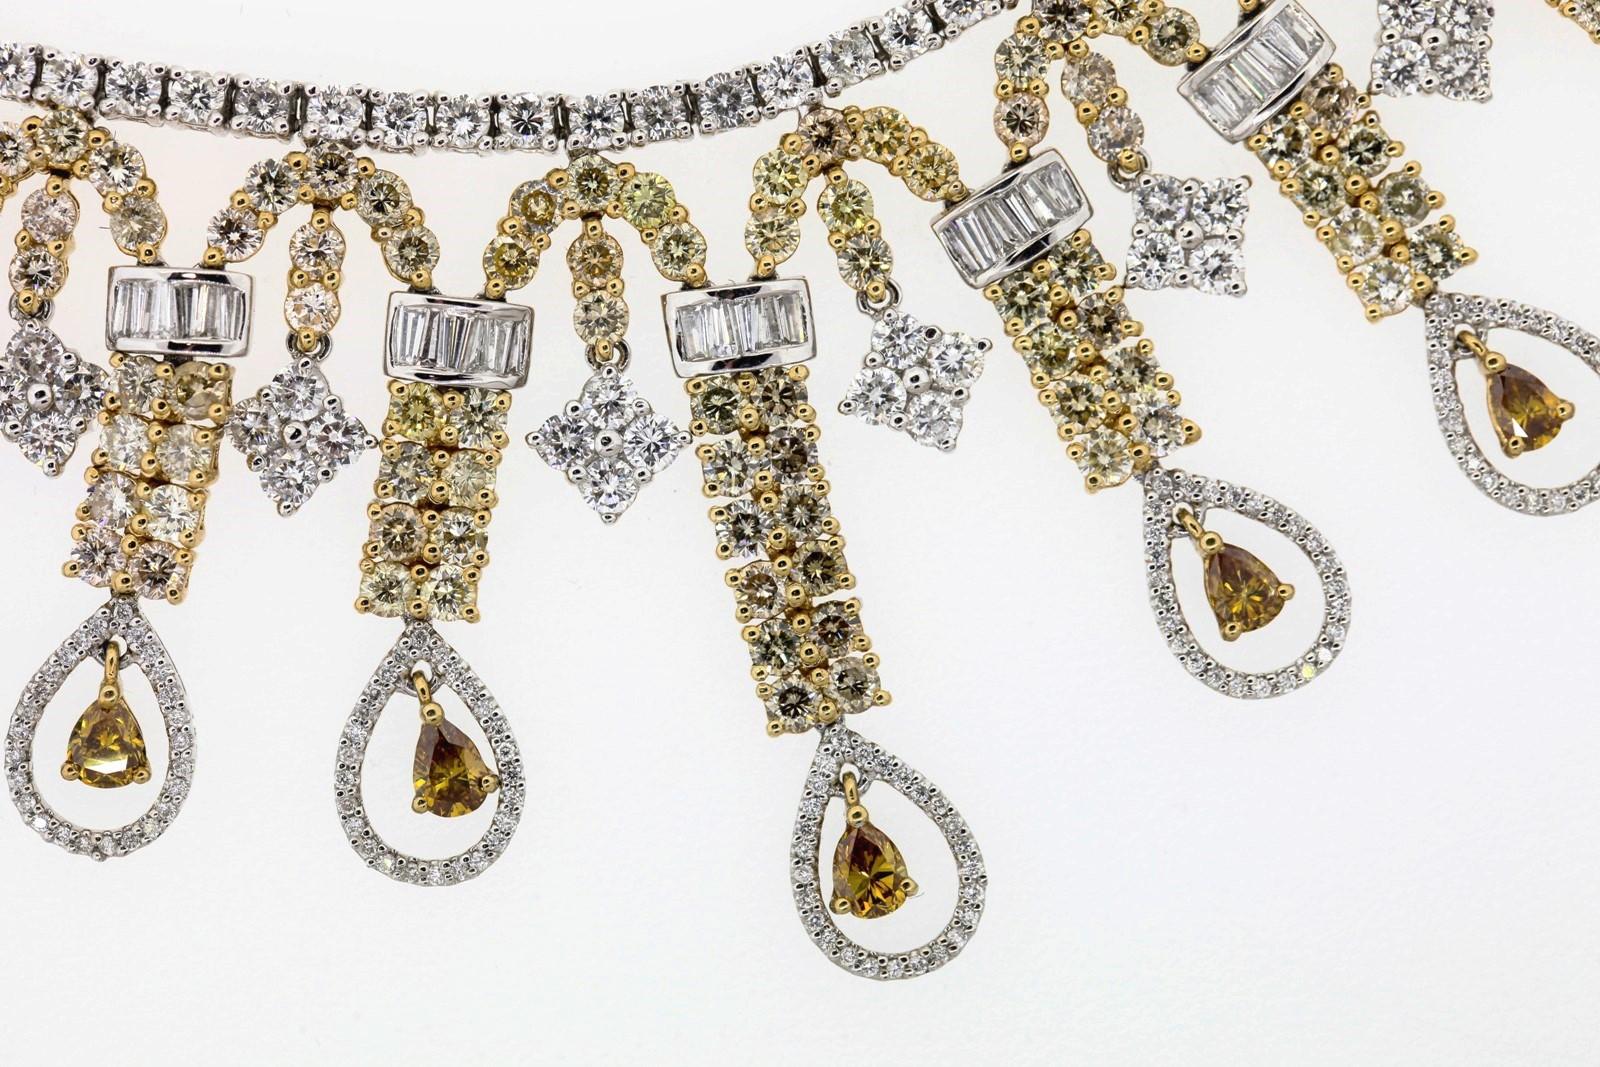 Fantastic and one of a kind brilliant Diamond necklace of 18.82 carat with a medley of shapes and colors.  The partial Riviera of round white diamonds taps eight falling arches of light Yellow and White diamonds, accented with Baguette and Square